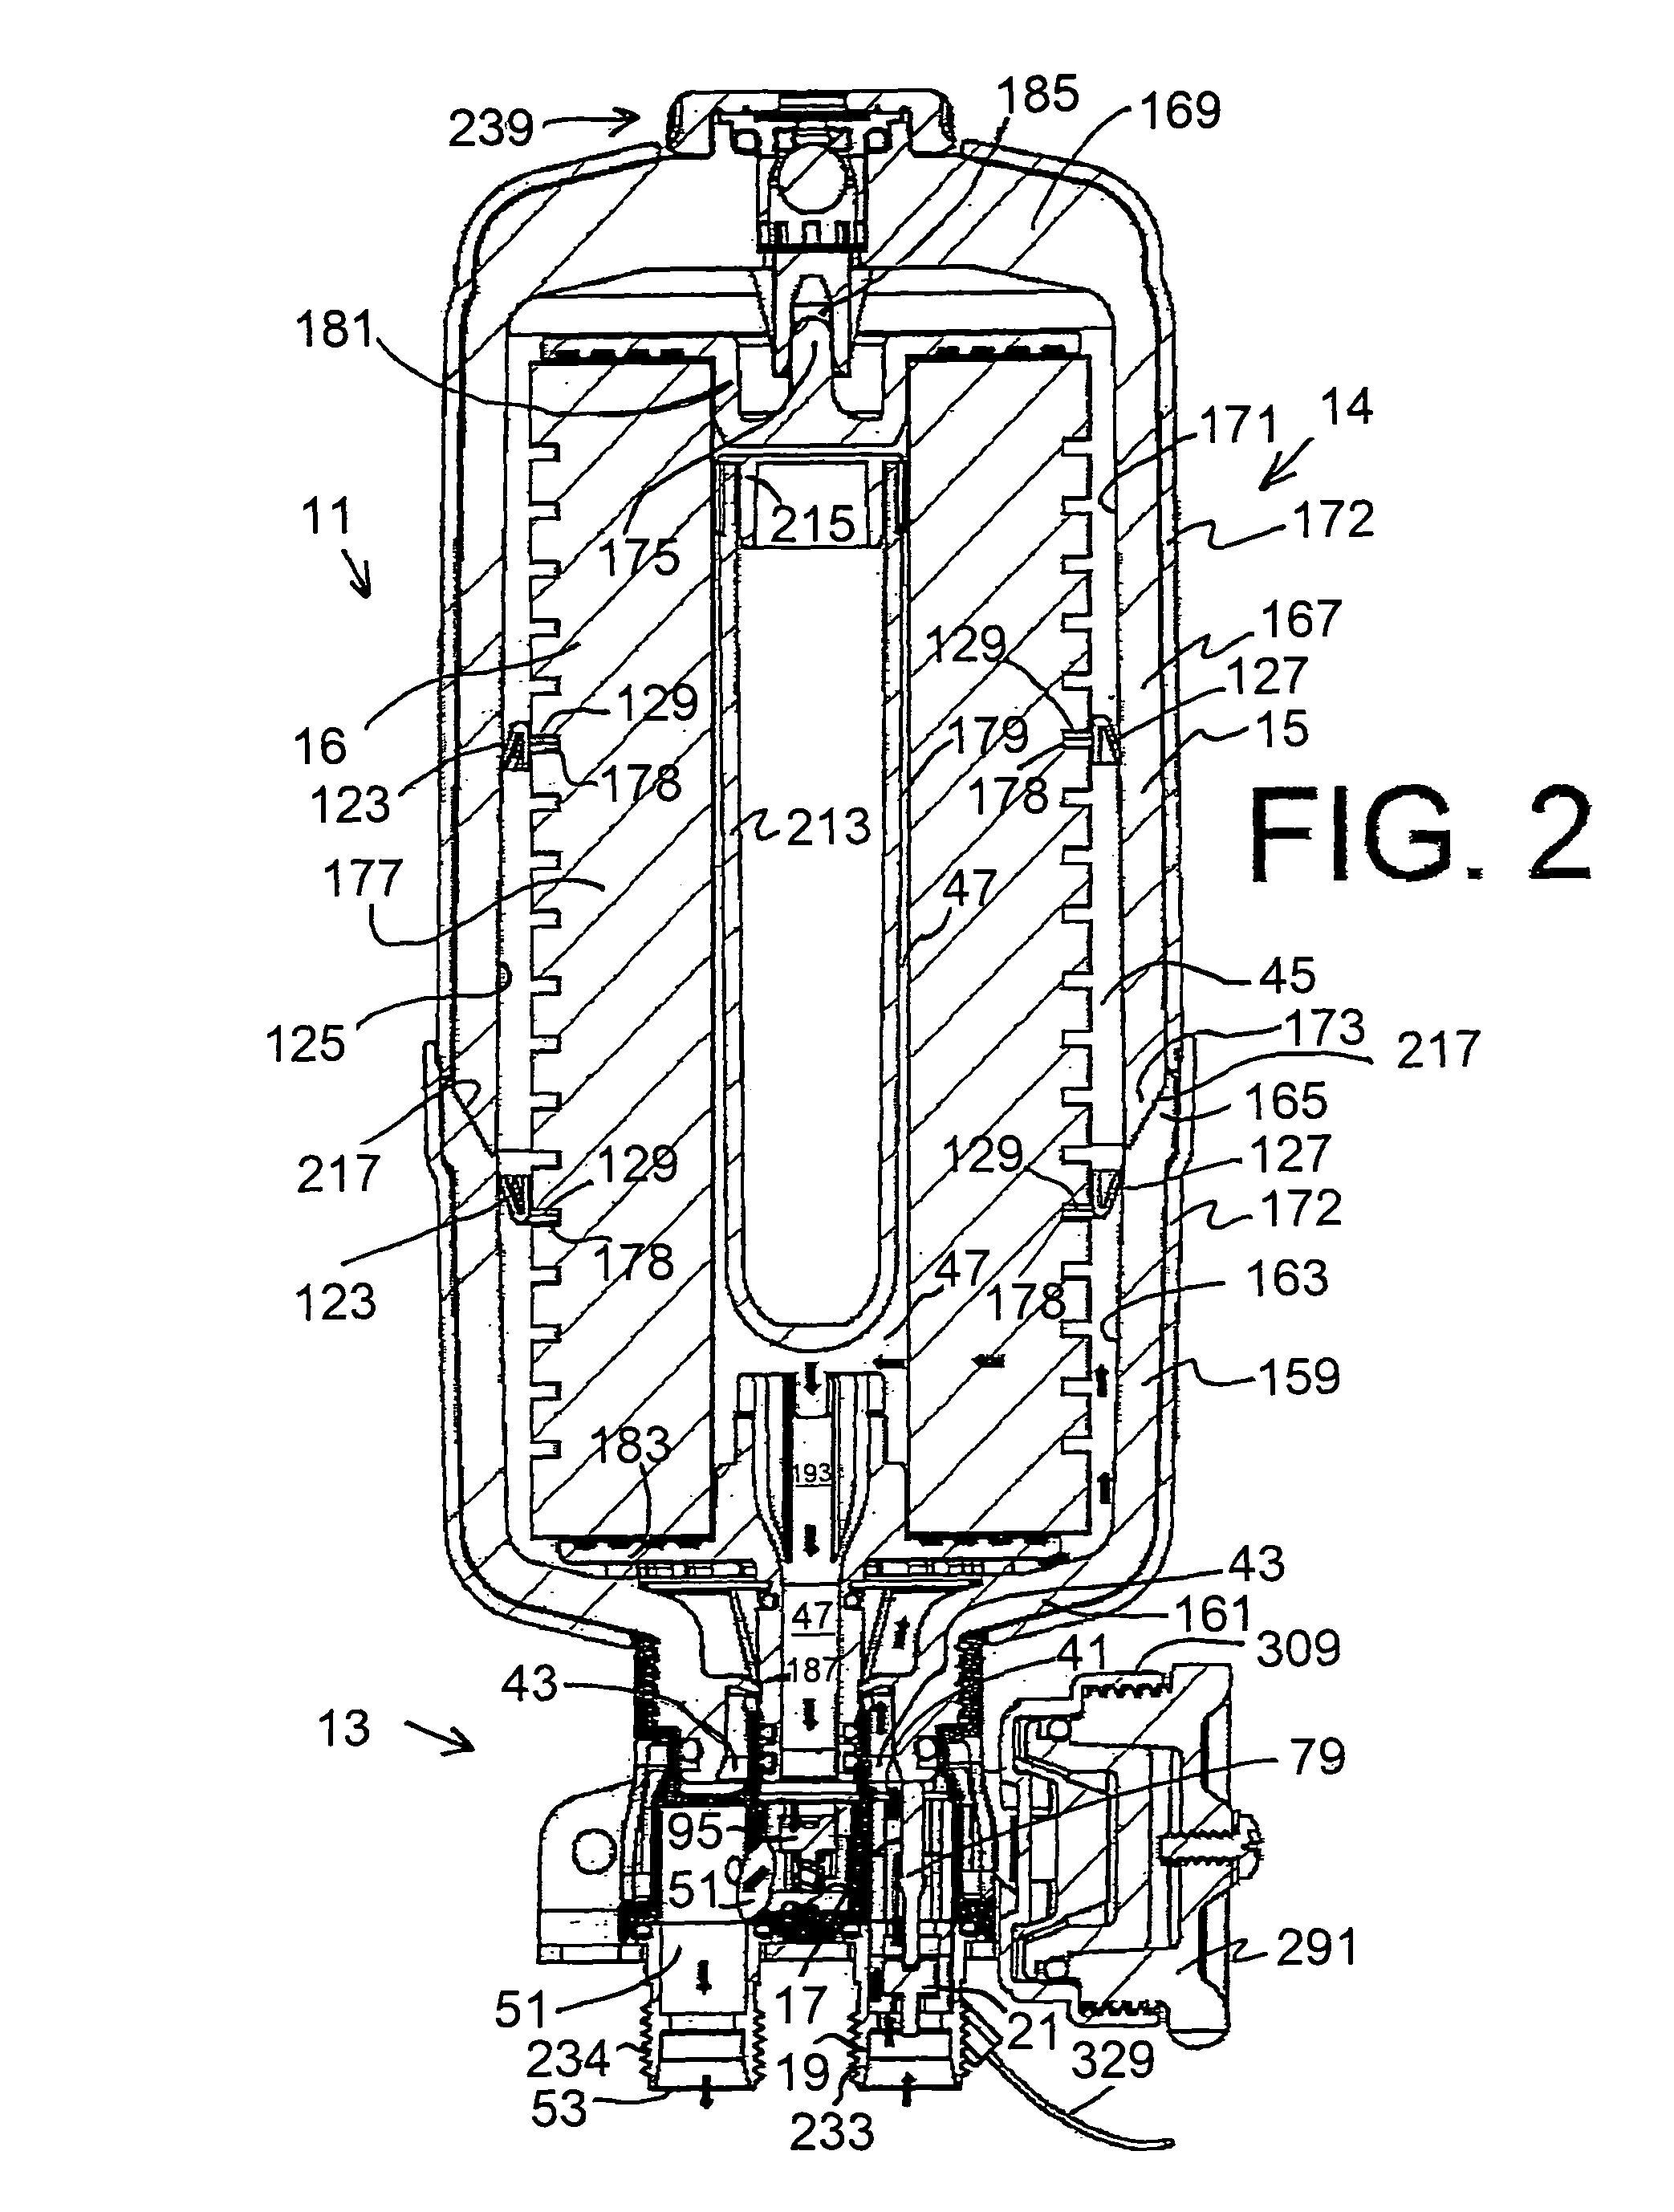 Apparatus for filtering and/or conditioning and/or purifying a fluid such as water, and interface thereof for providing water boiler expansion pressure relief